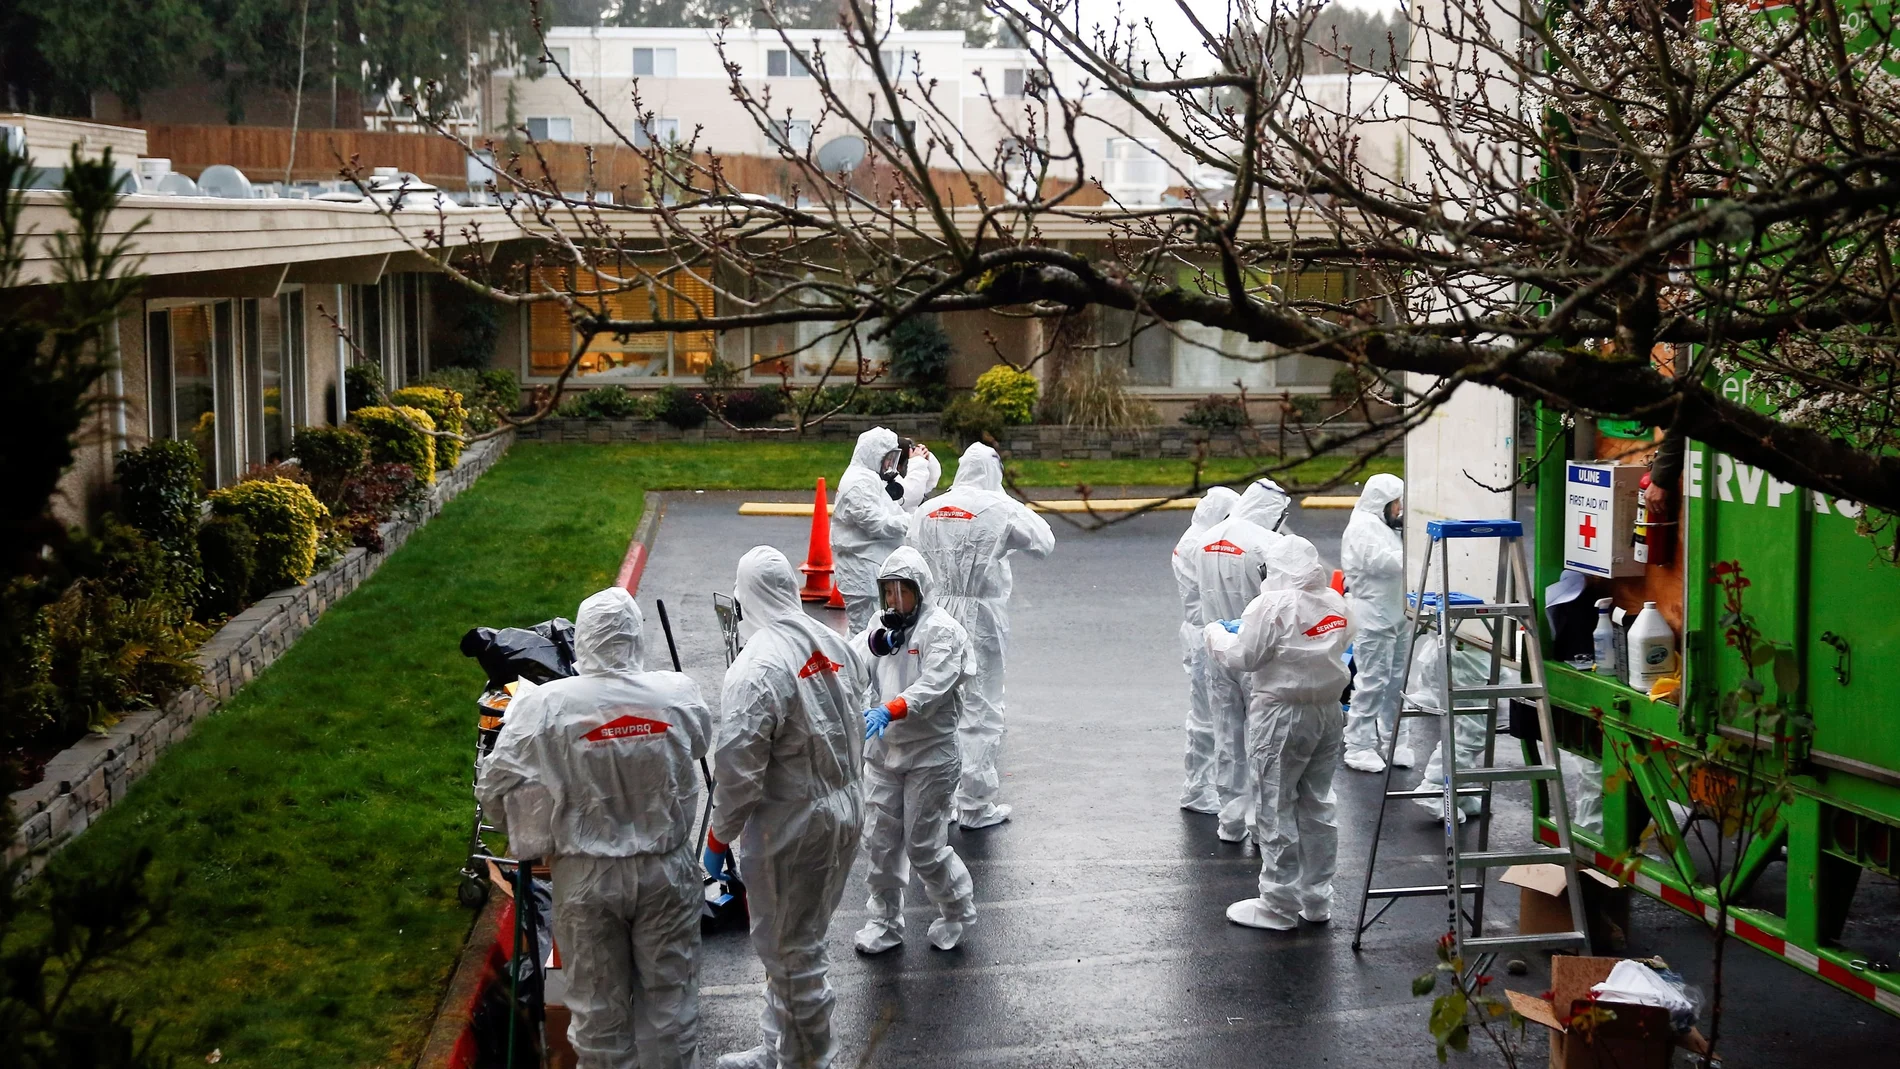 A Servpro cleaning crew puts on protective gear before entering Life Care Center of Kirkland